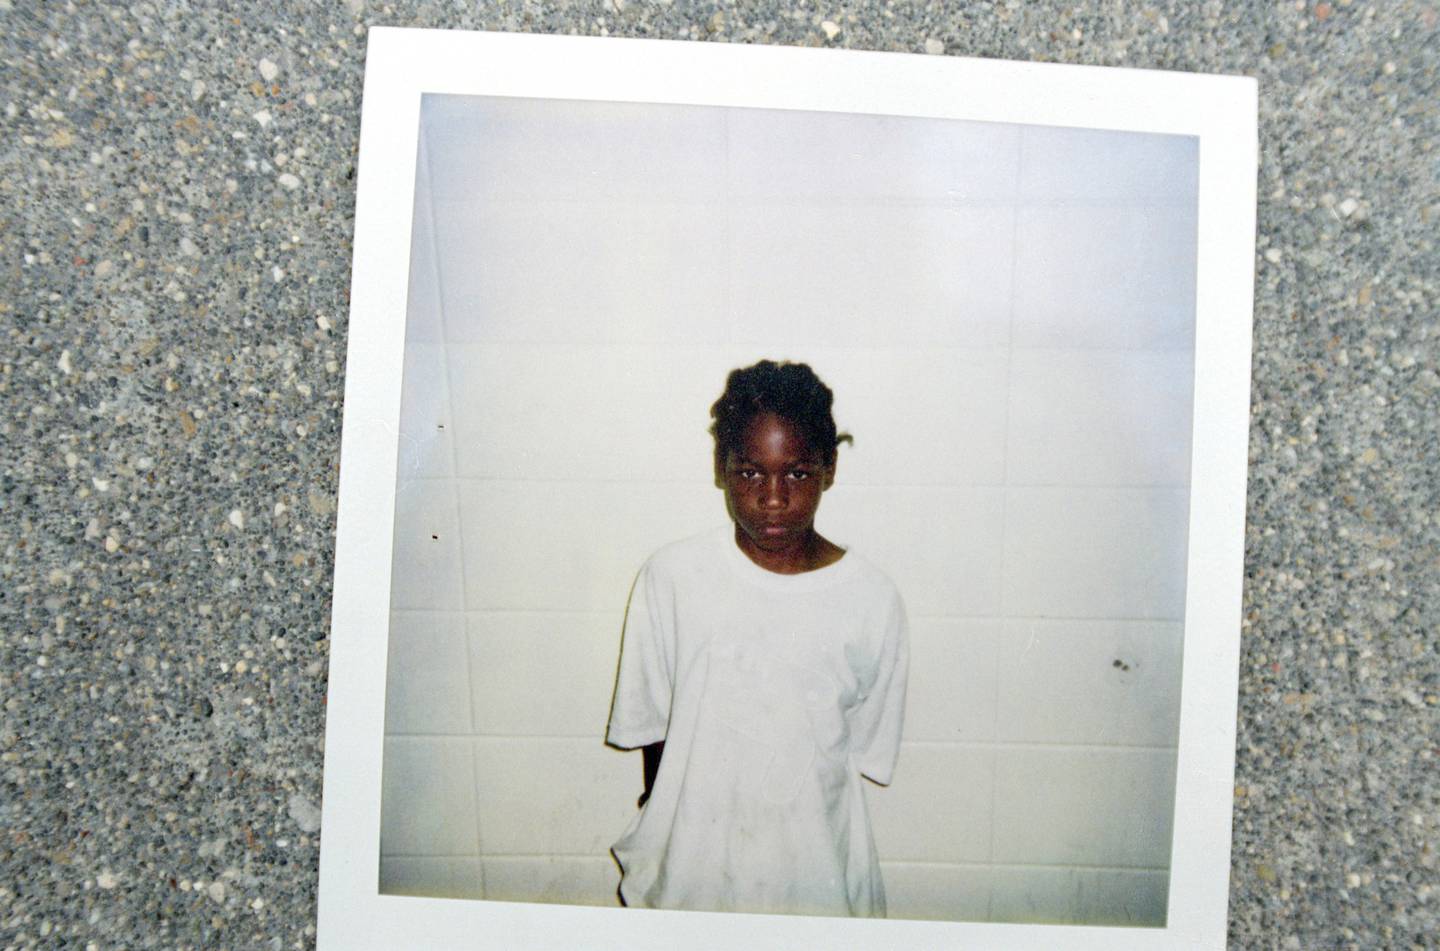 11-year-old Robert "Yummy" Sandifer, in an undated police handout photo, who was shot and killed by Cragg and Derrick Hardaway in September 1994.  